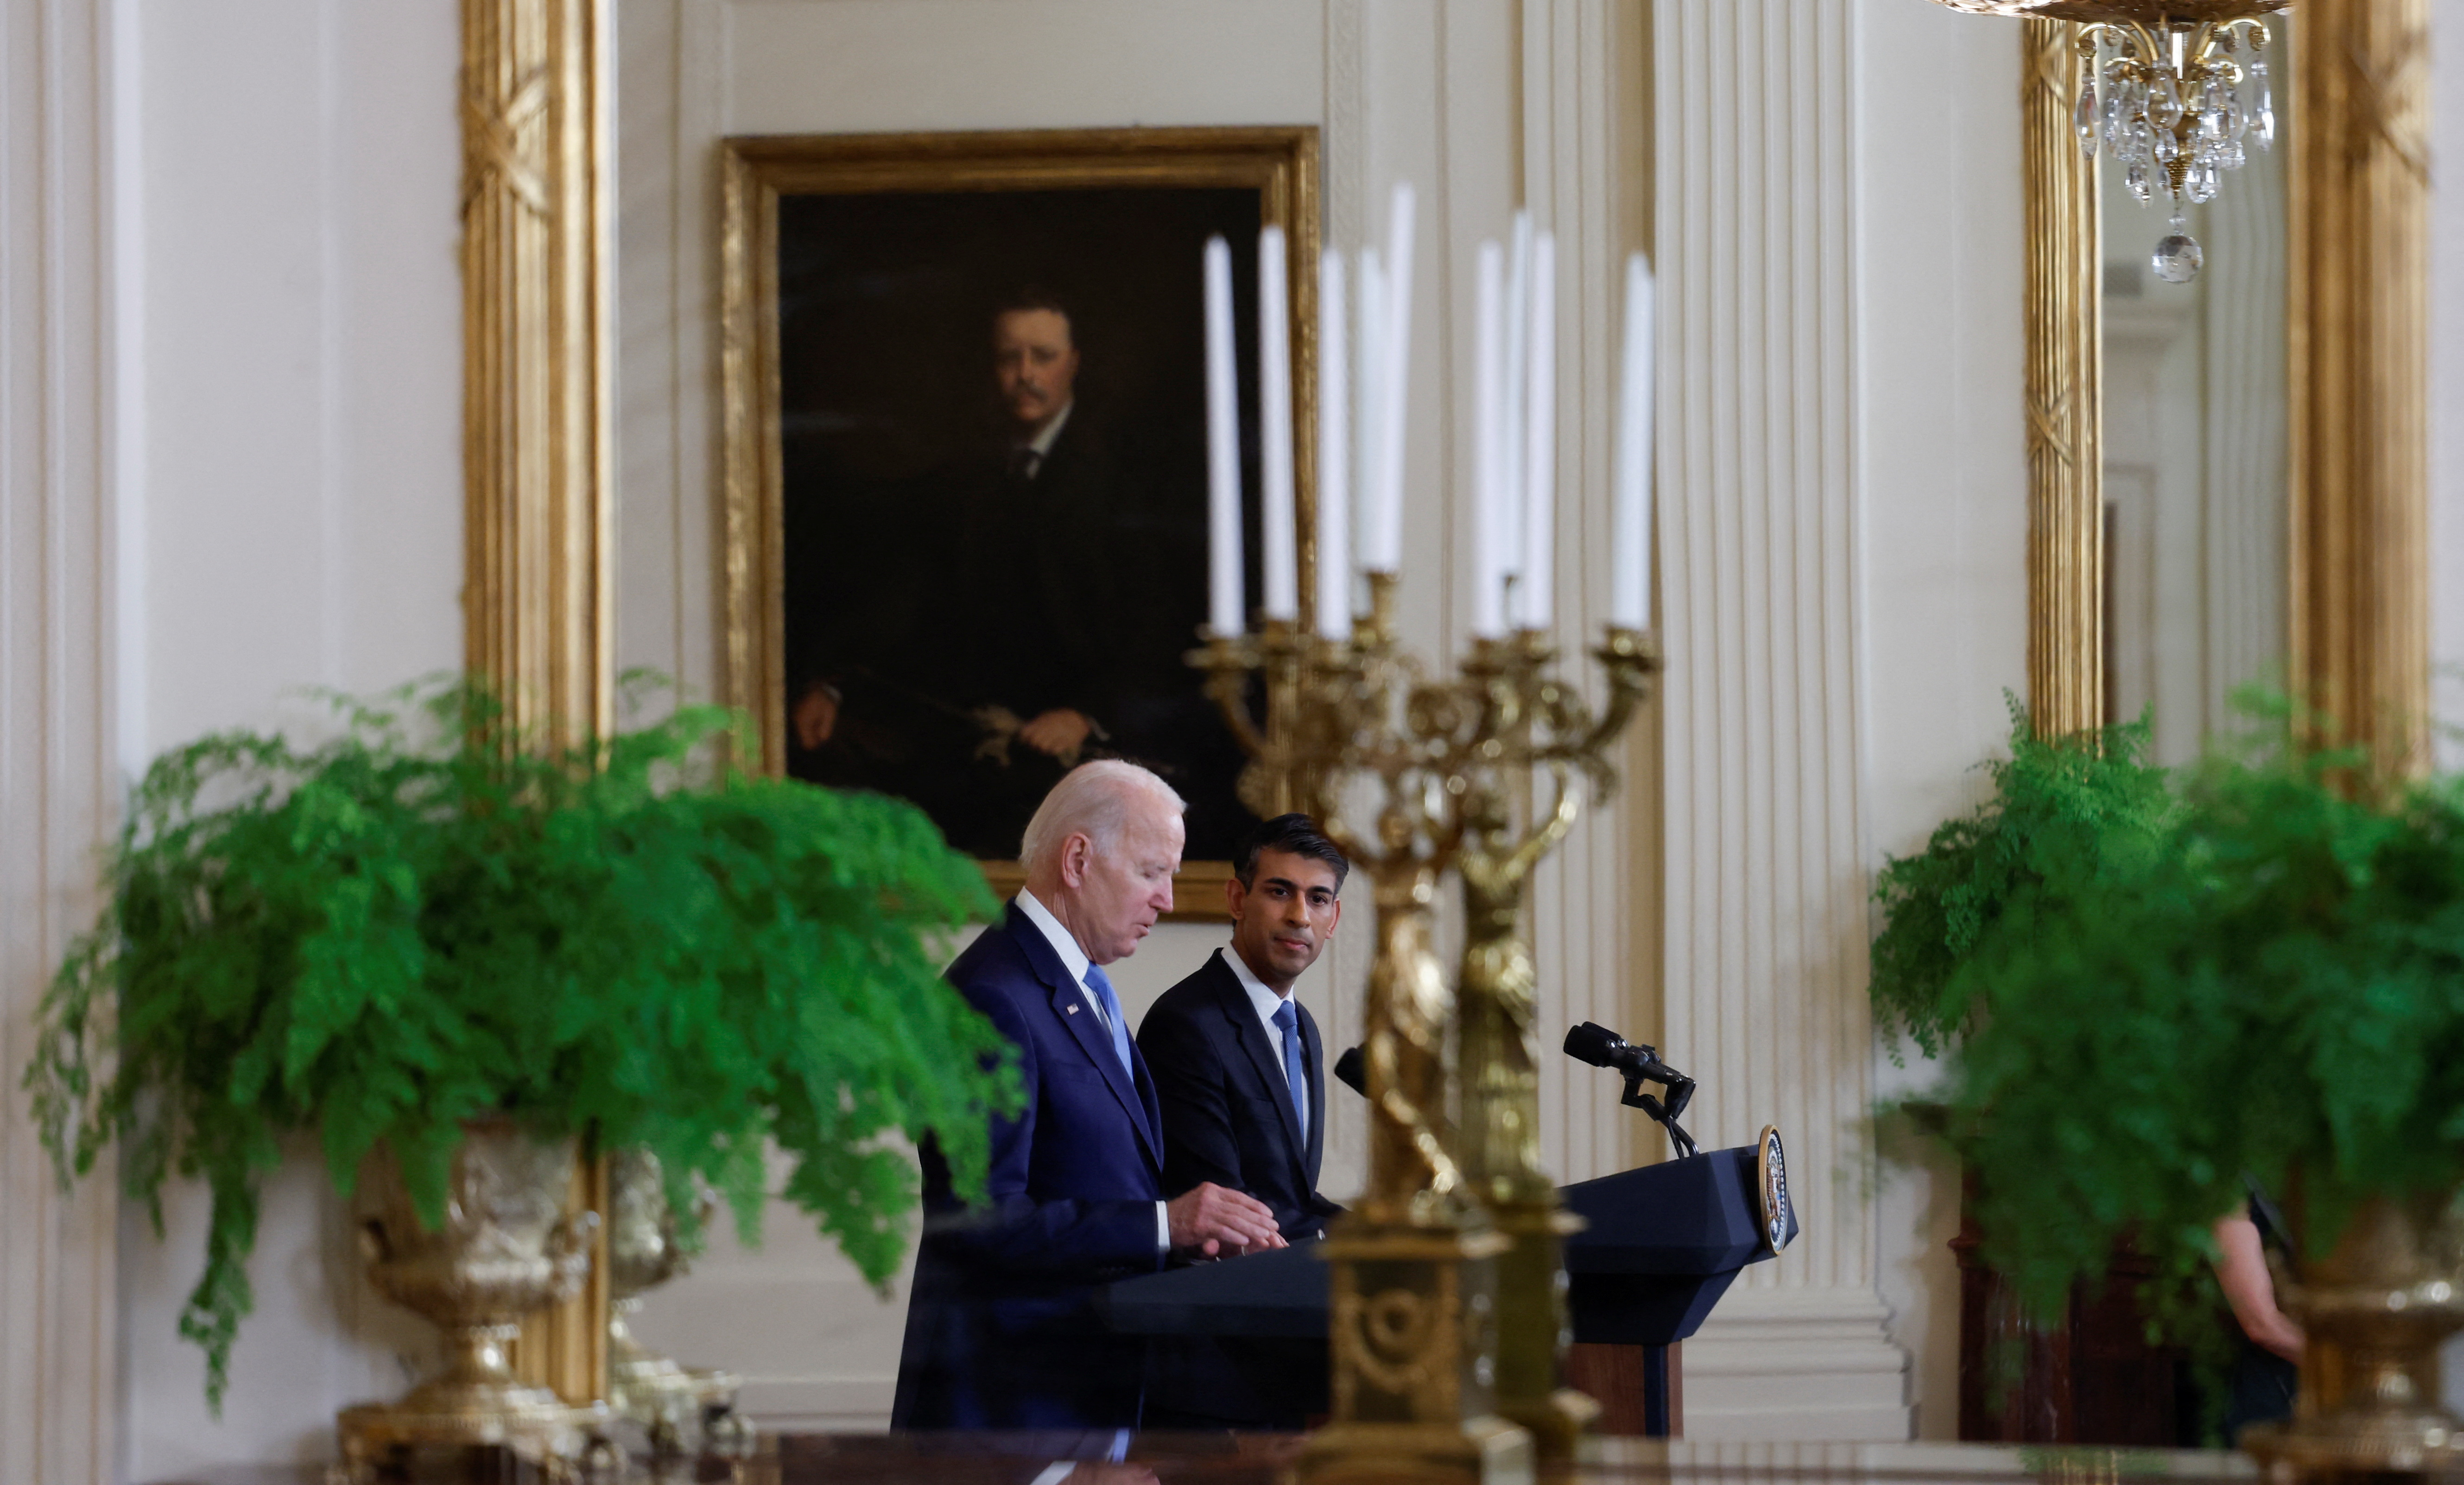 U.S. President Biden and British Prime Minister Sunak hold joint news conference at the White House in Washington